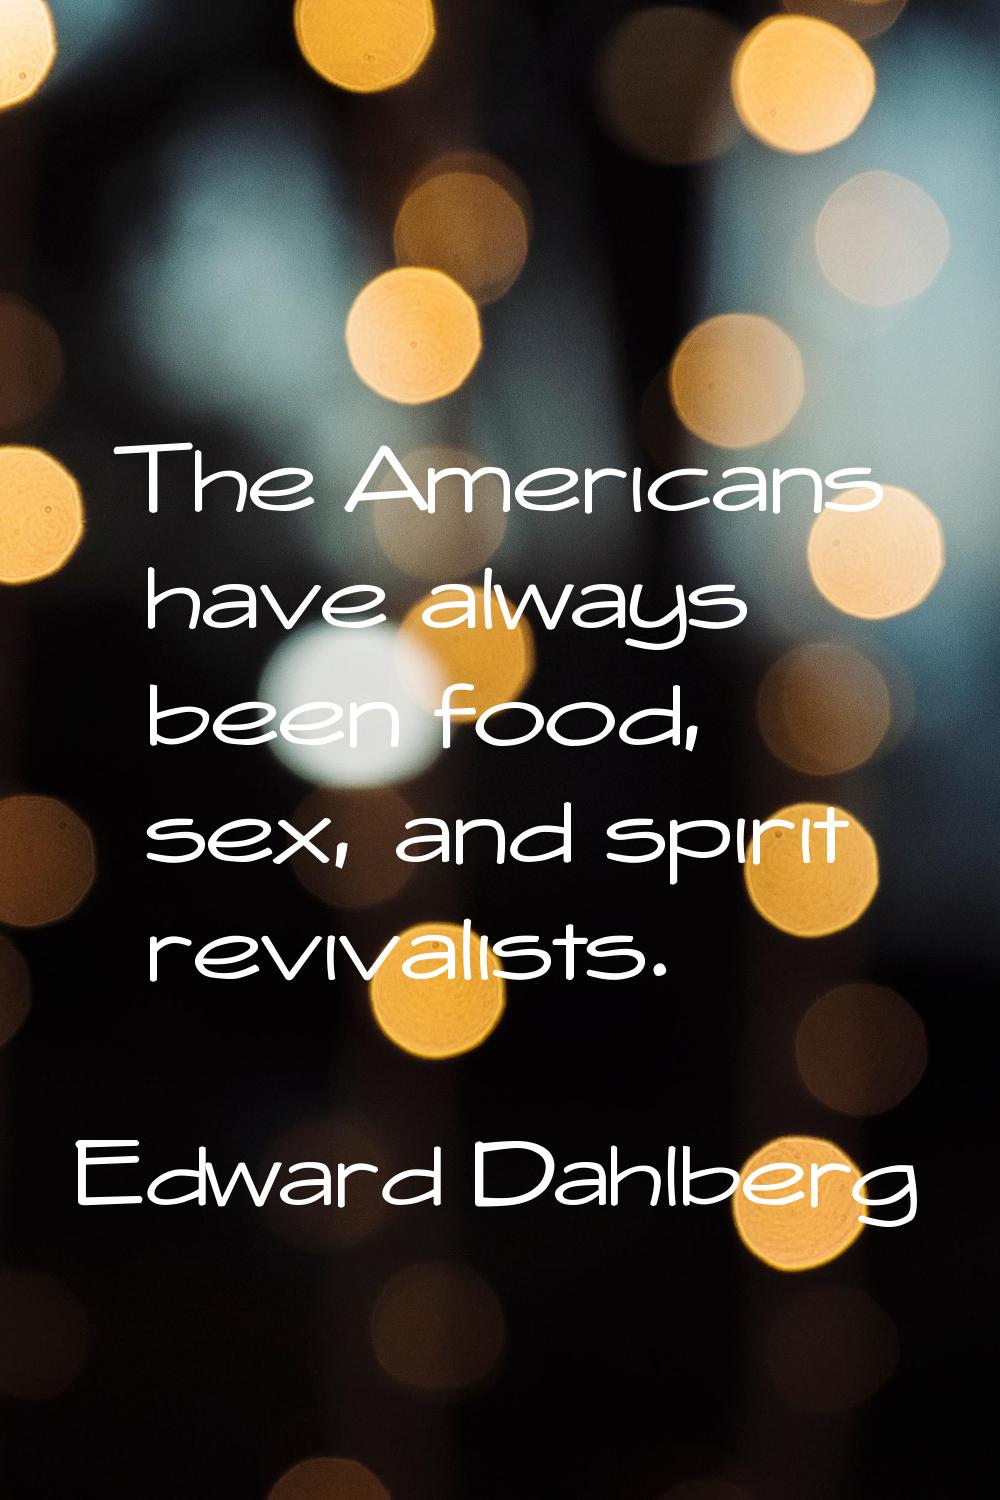 The Americans have always been food, sex, and spirit revivalists.